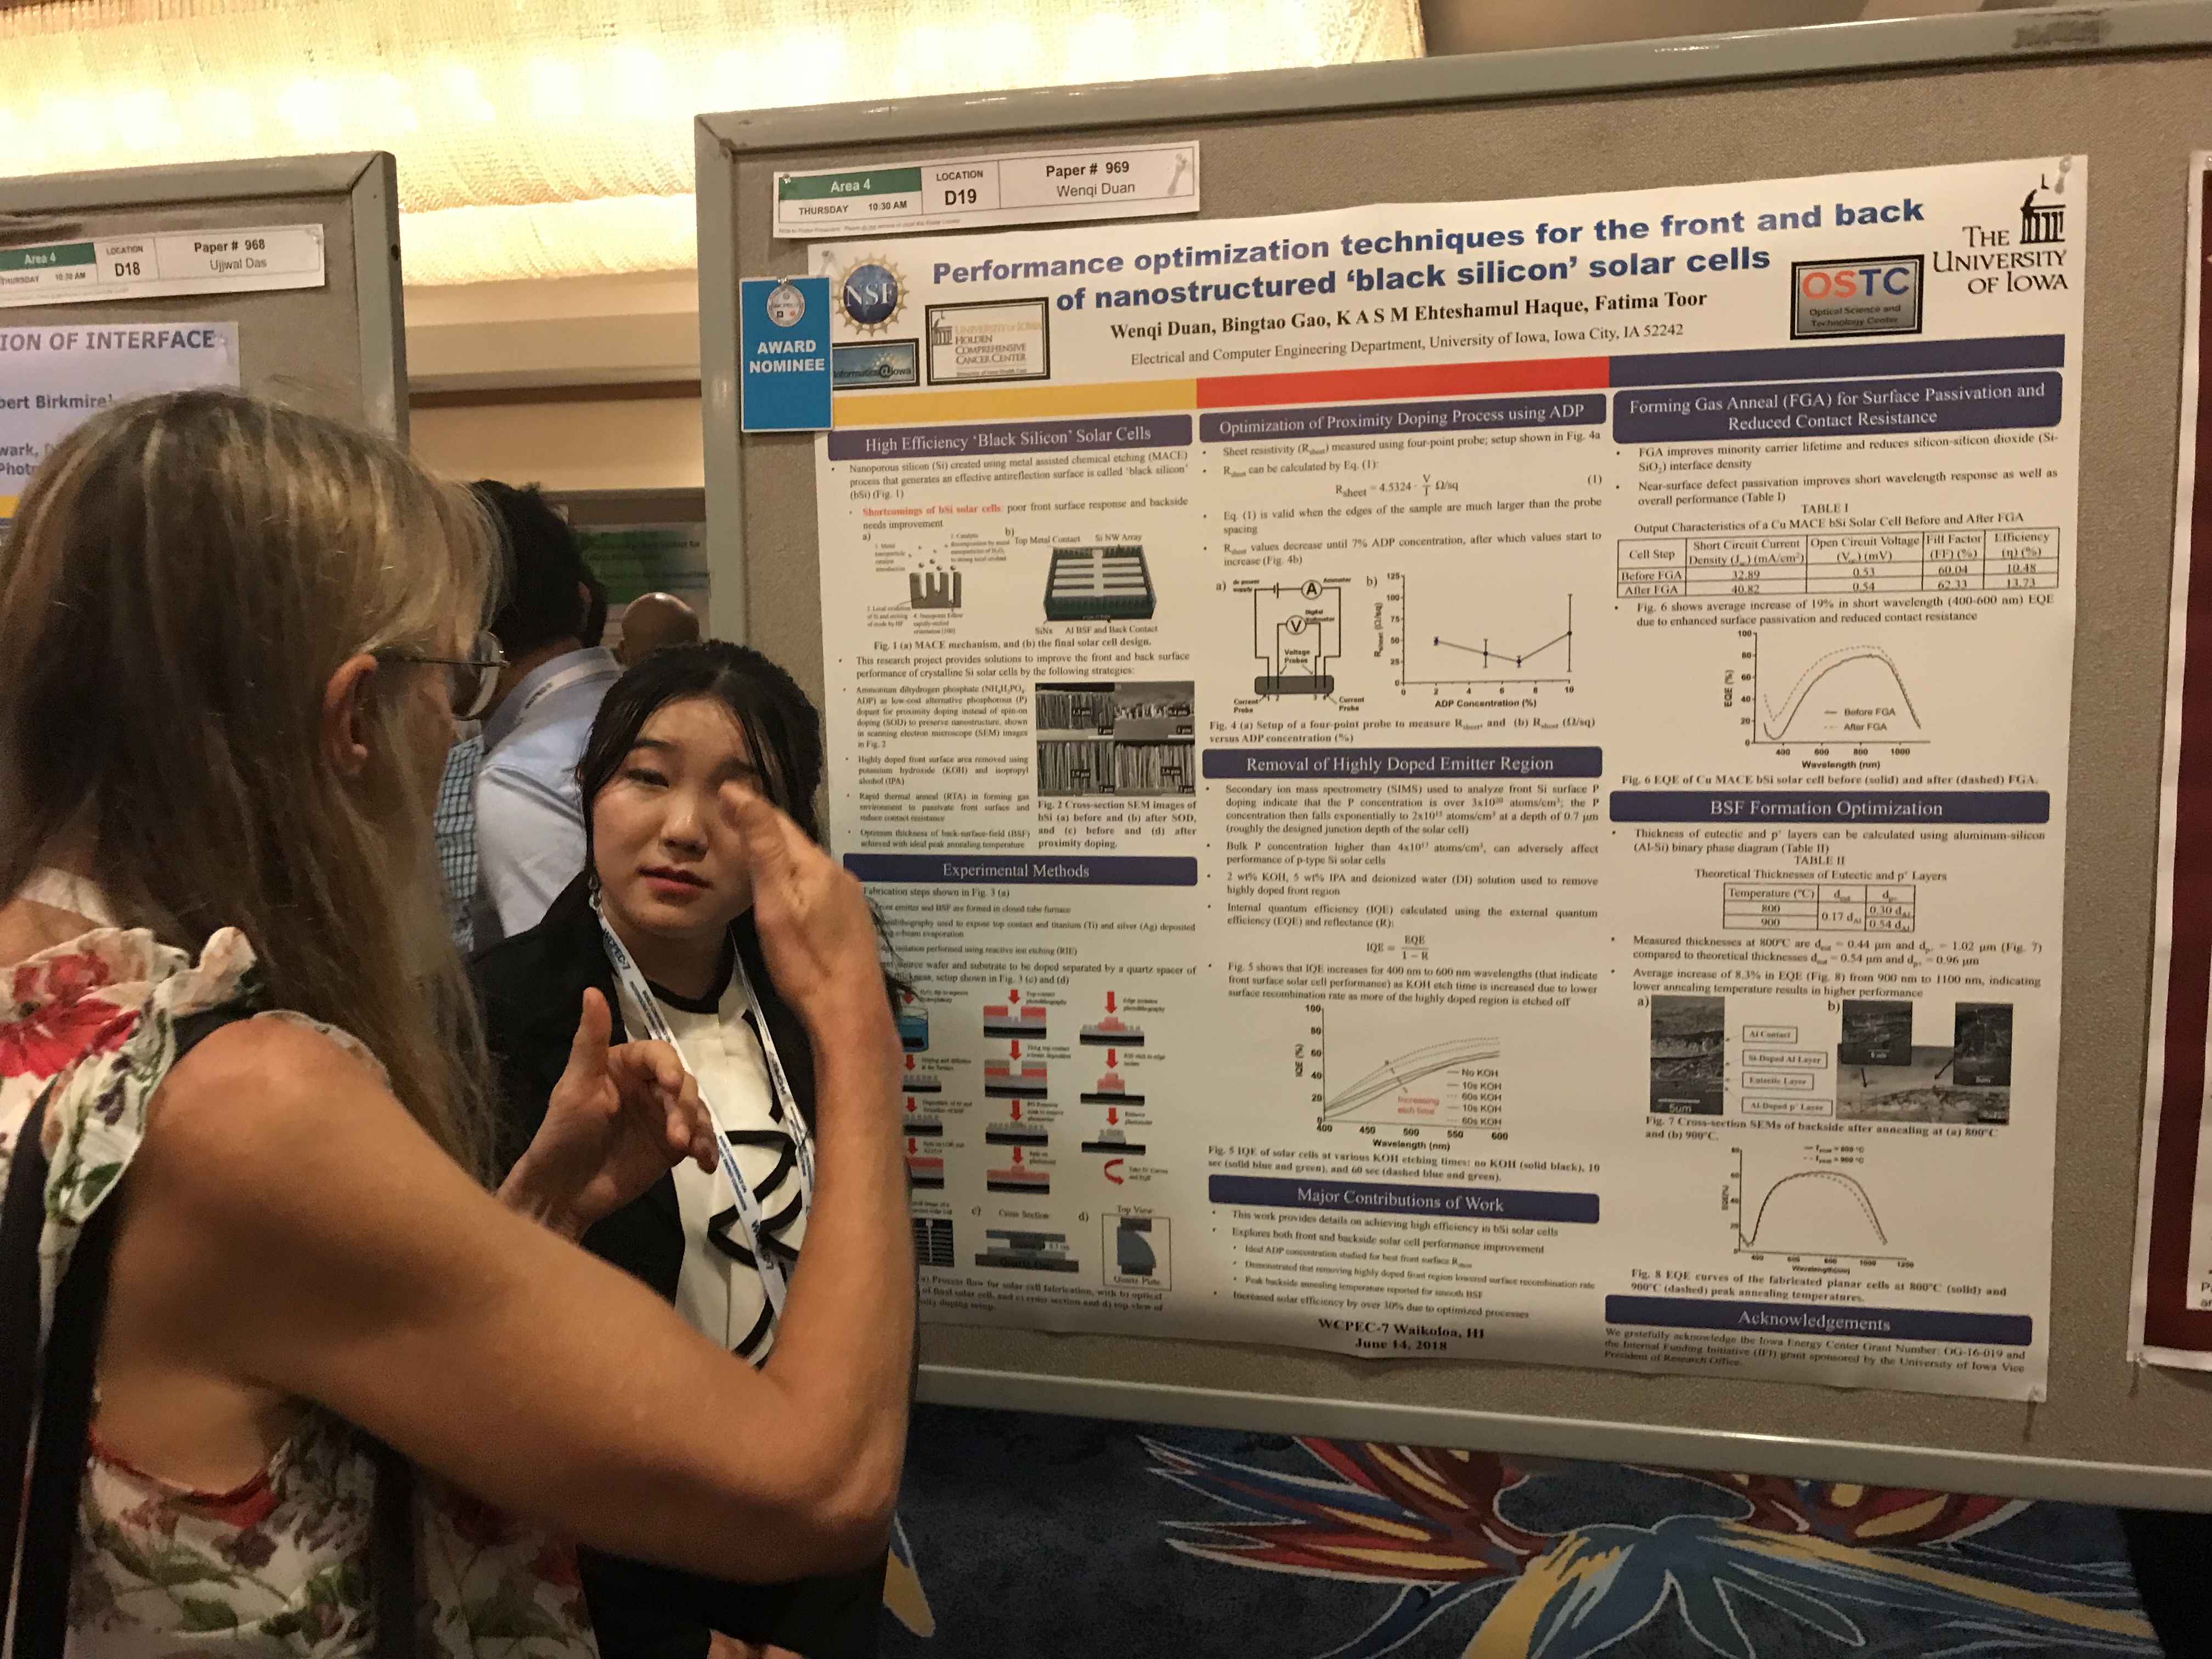 Wenqi discussing poster